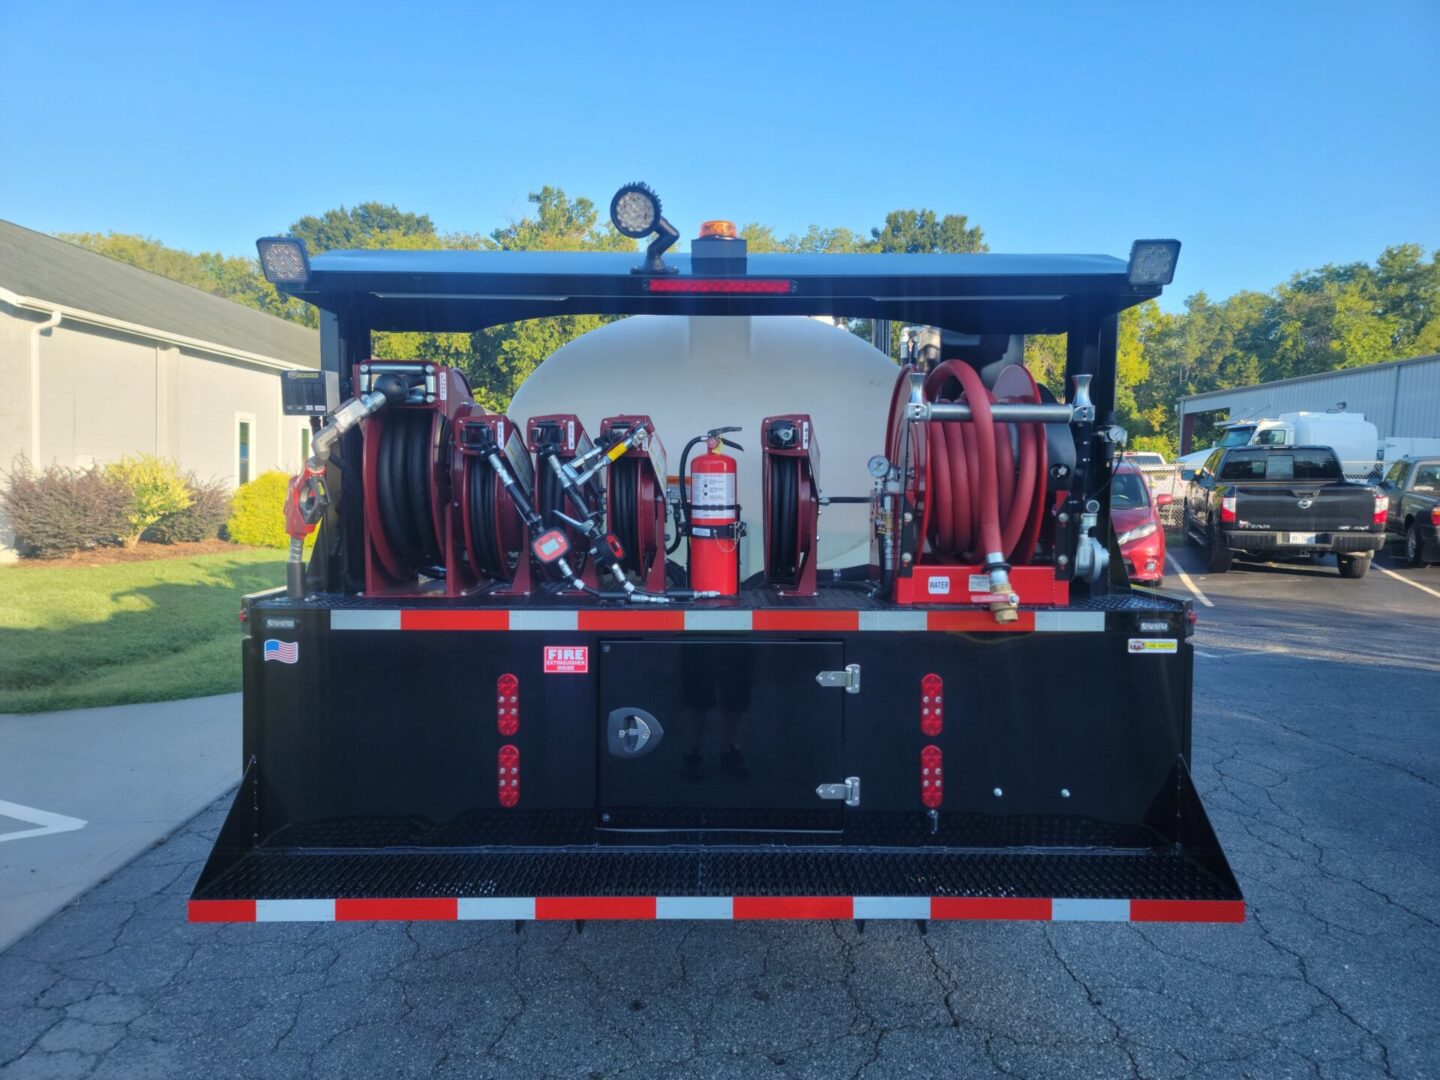 A truck with hoses and other equipment in the back.